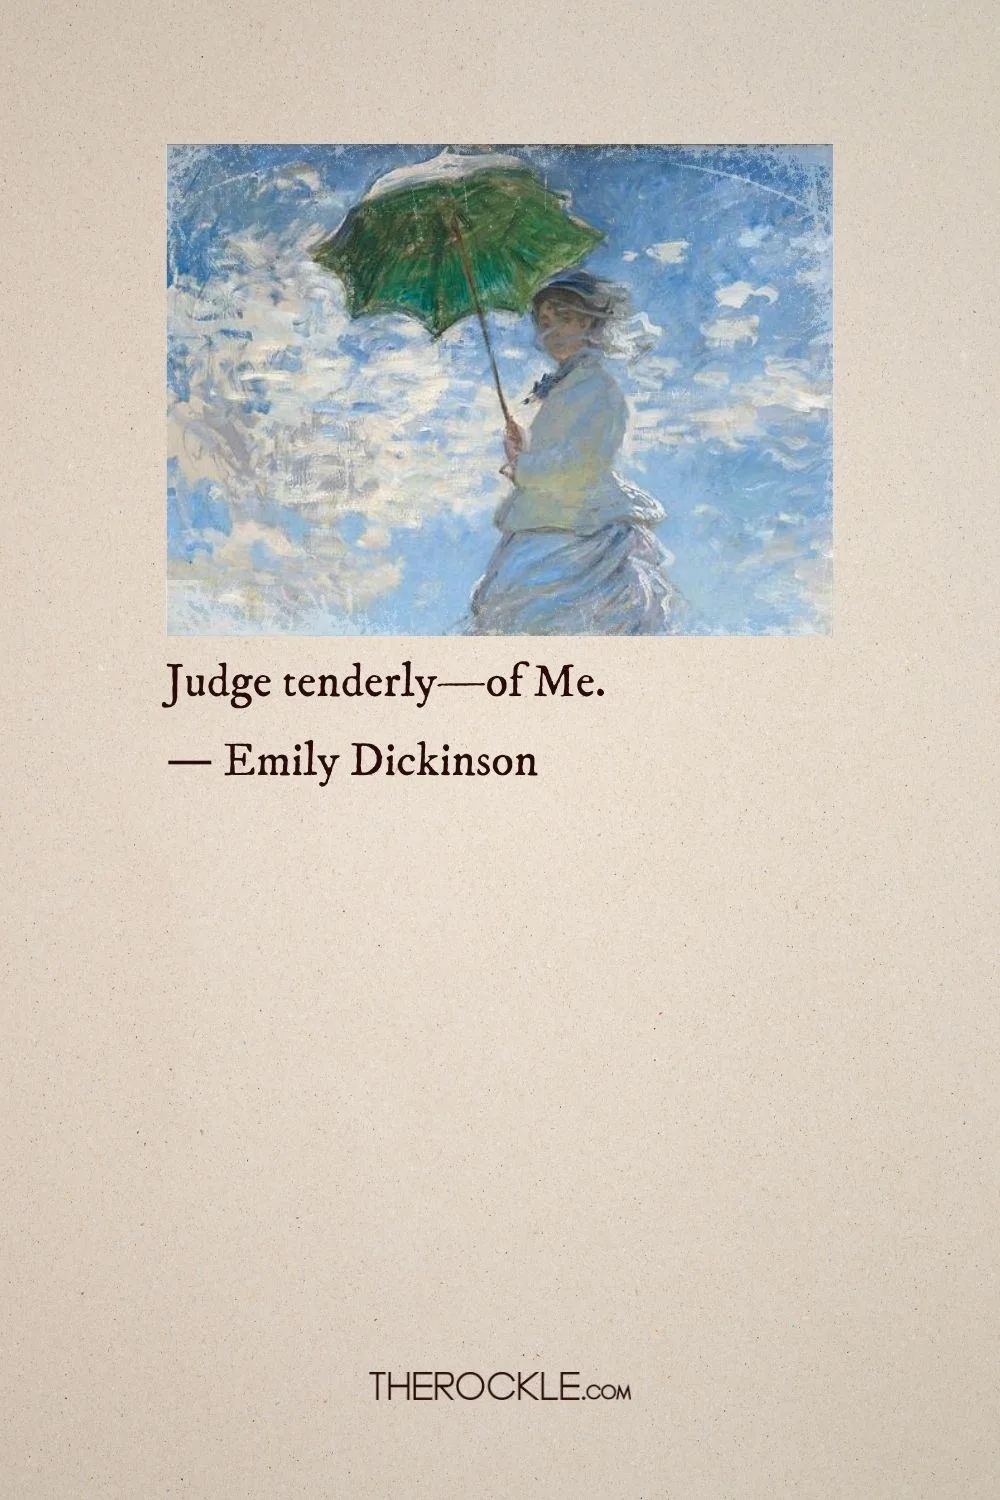 Emily Dickinson on understanding and compassion